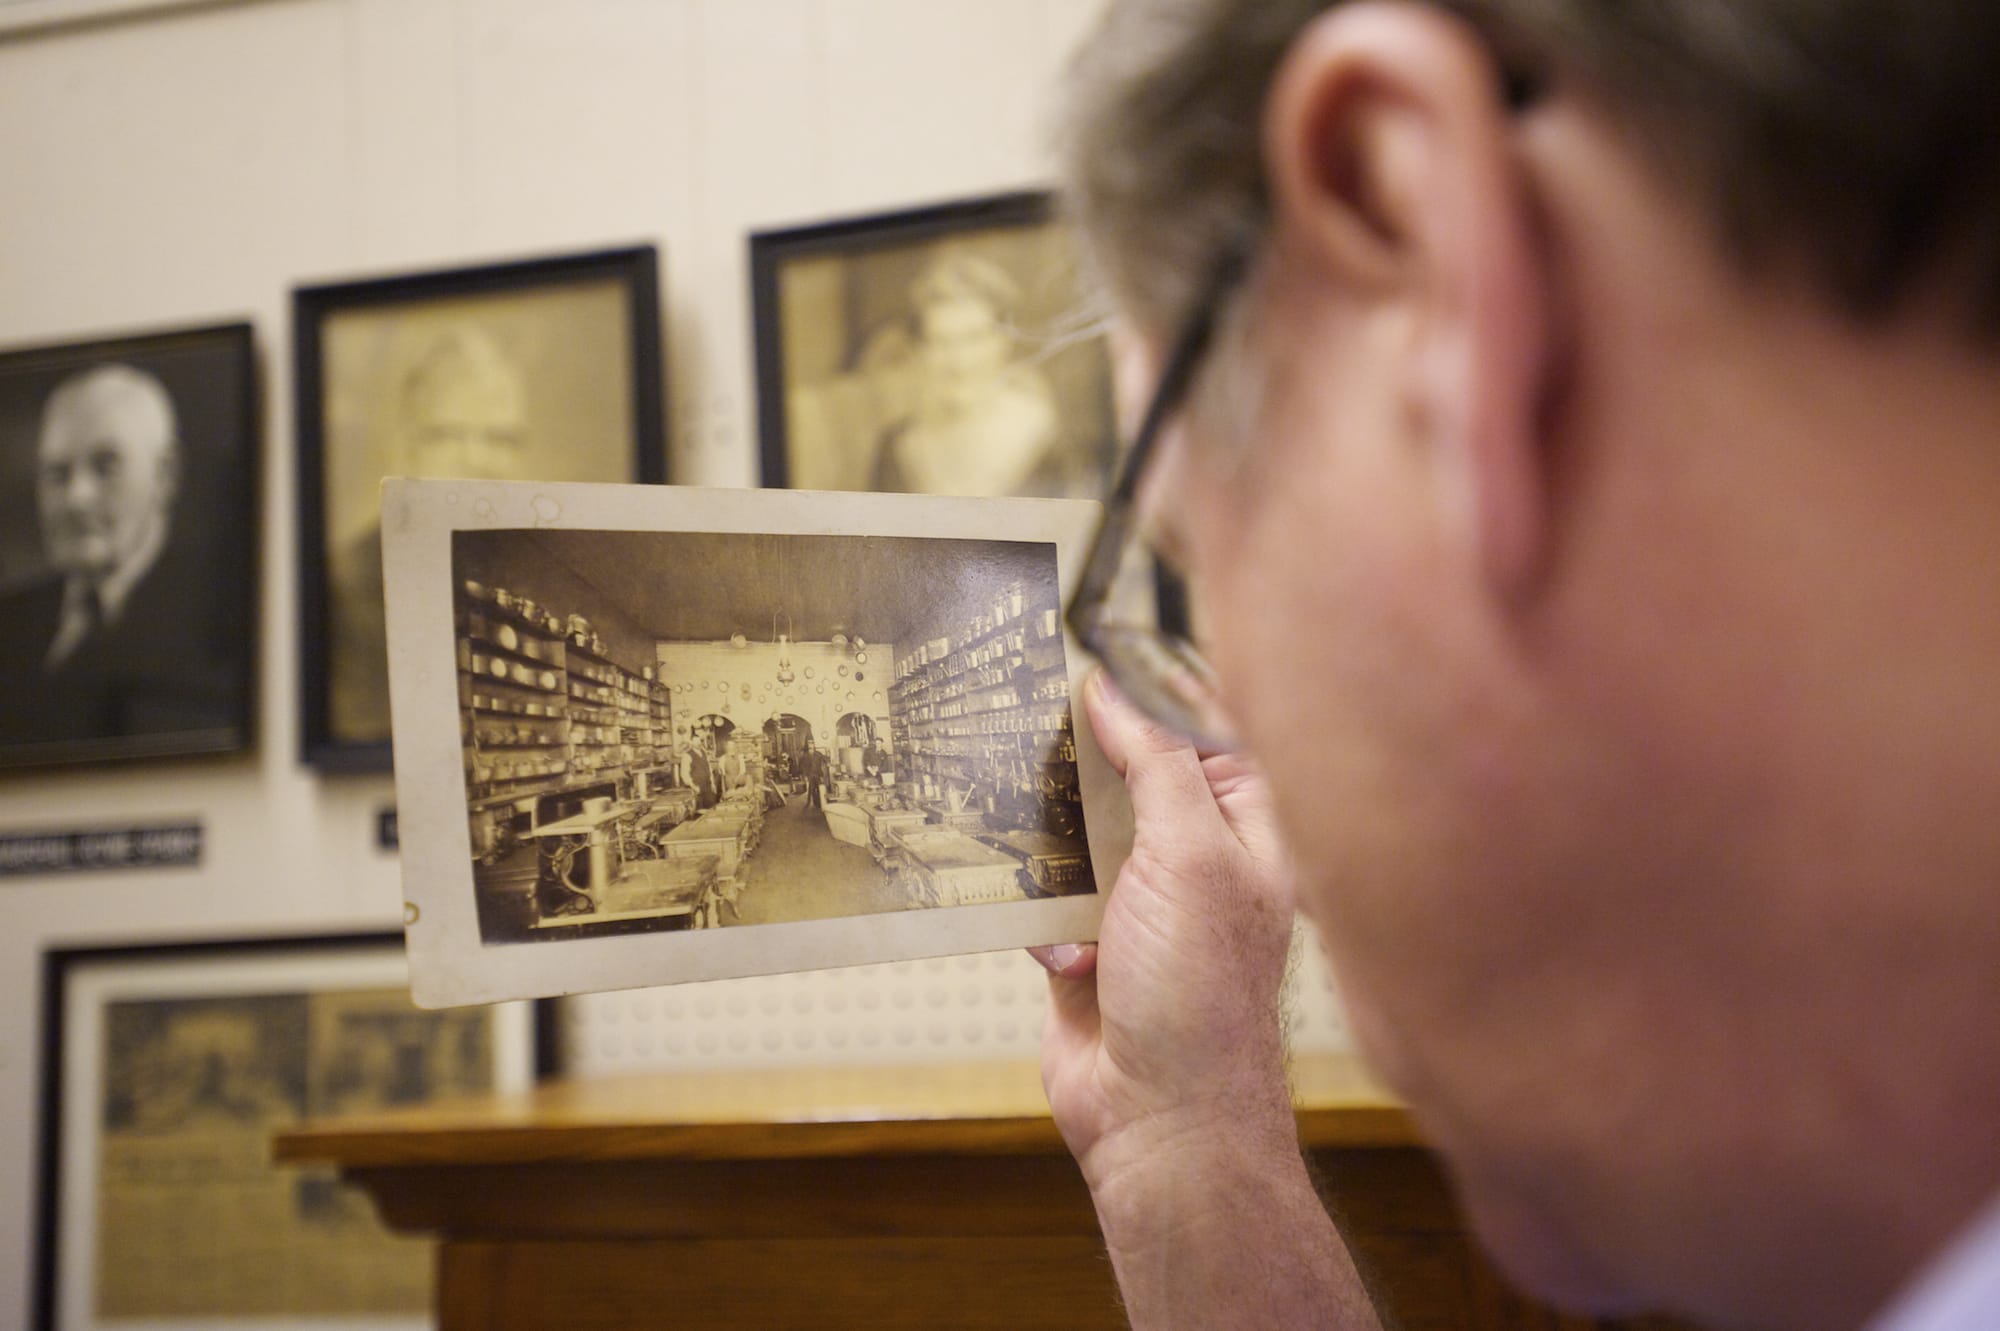 Tom Craig examines a vintage photograph that shows an earlier version of the Sparks store in downtown Vancouver.